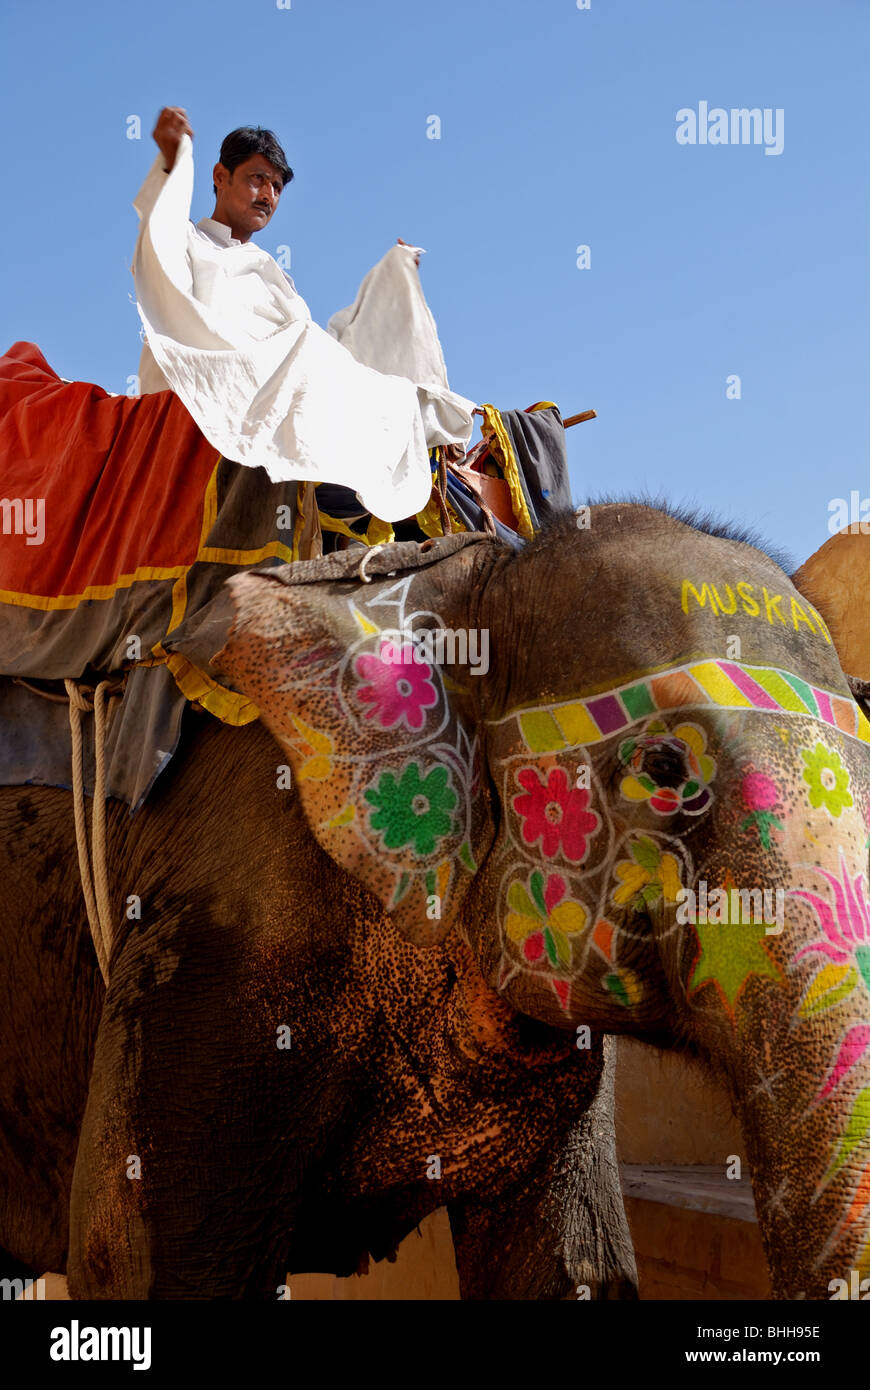 Decorated Elephant And Rider At Amber Palace In Jaipur India Stock Photo Alamy